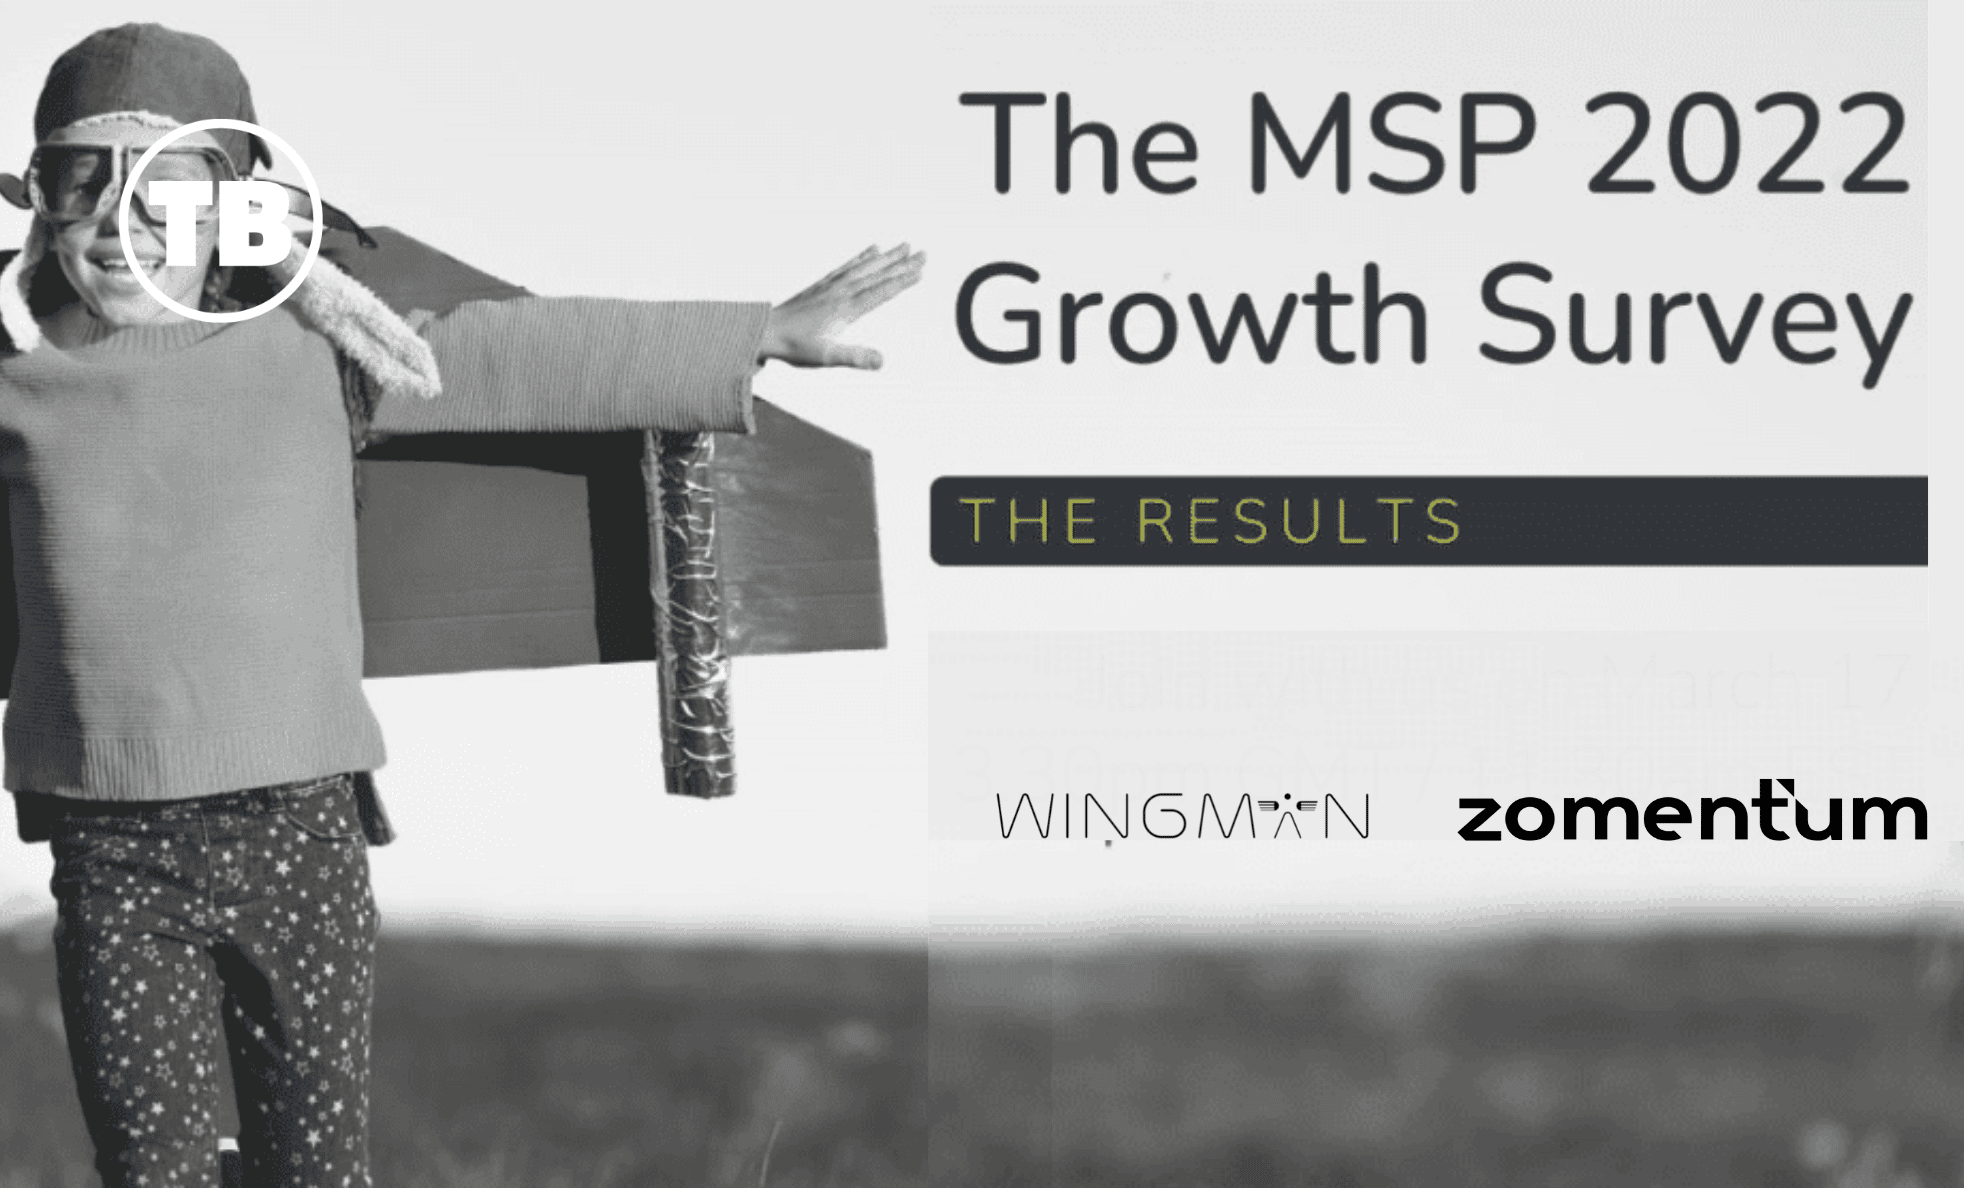 The MSP 2022 Growth Survey Results image